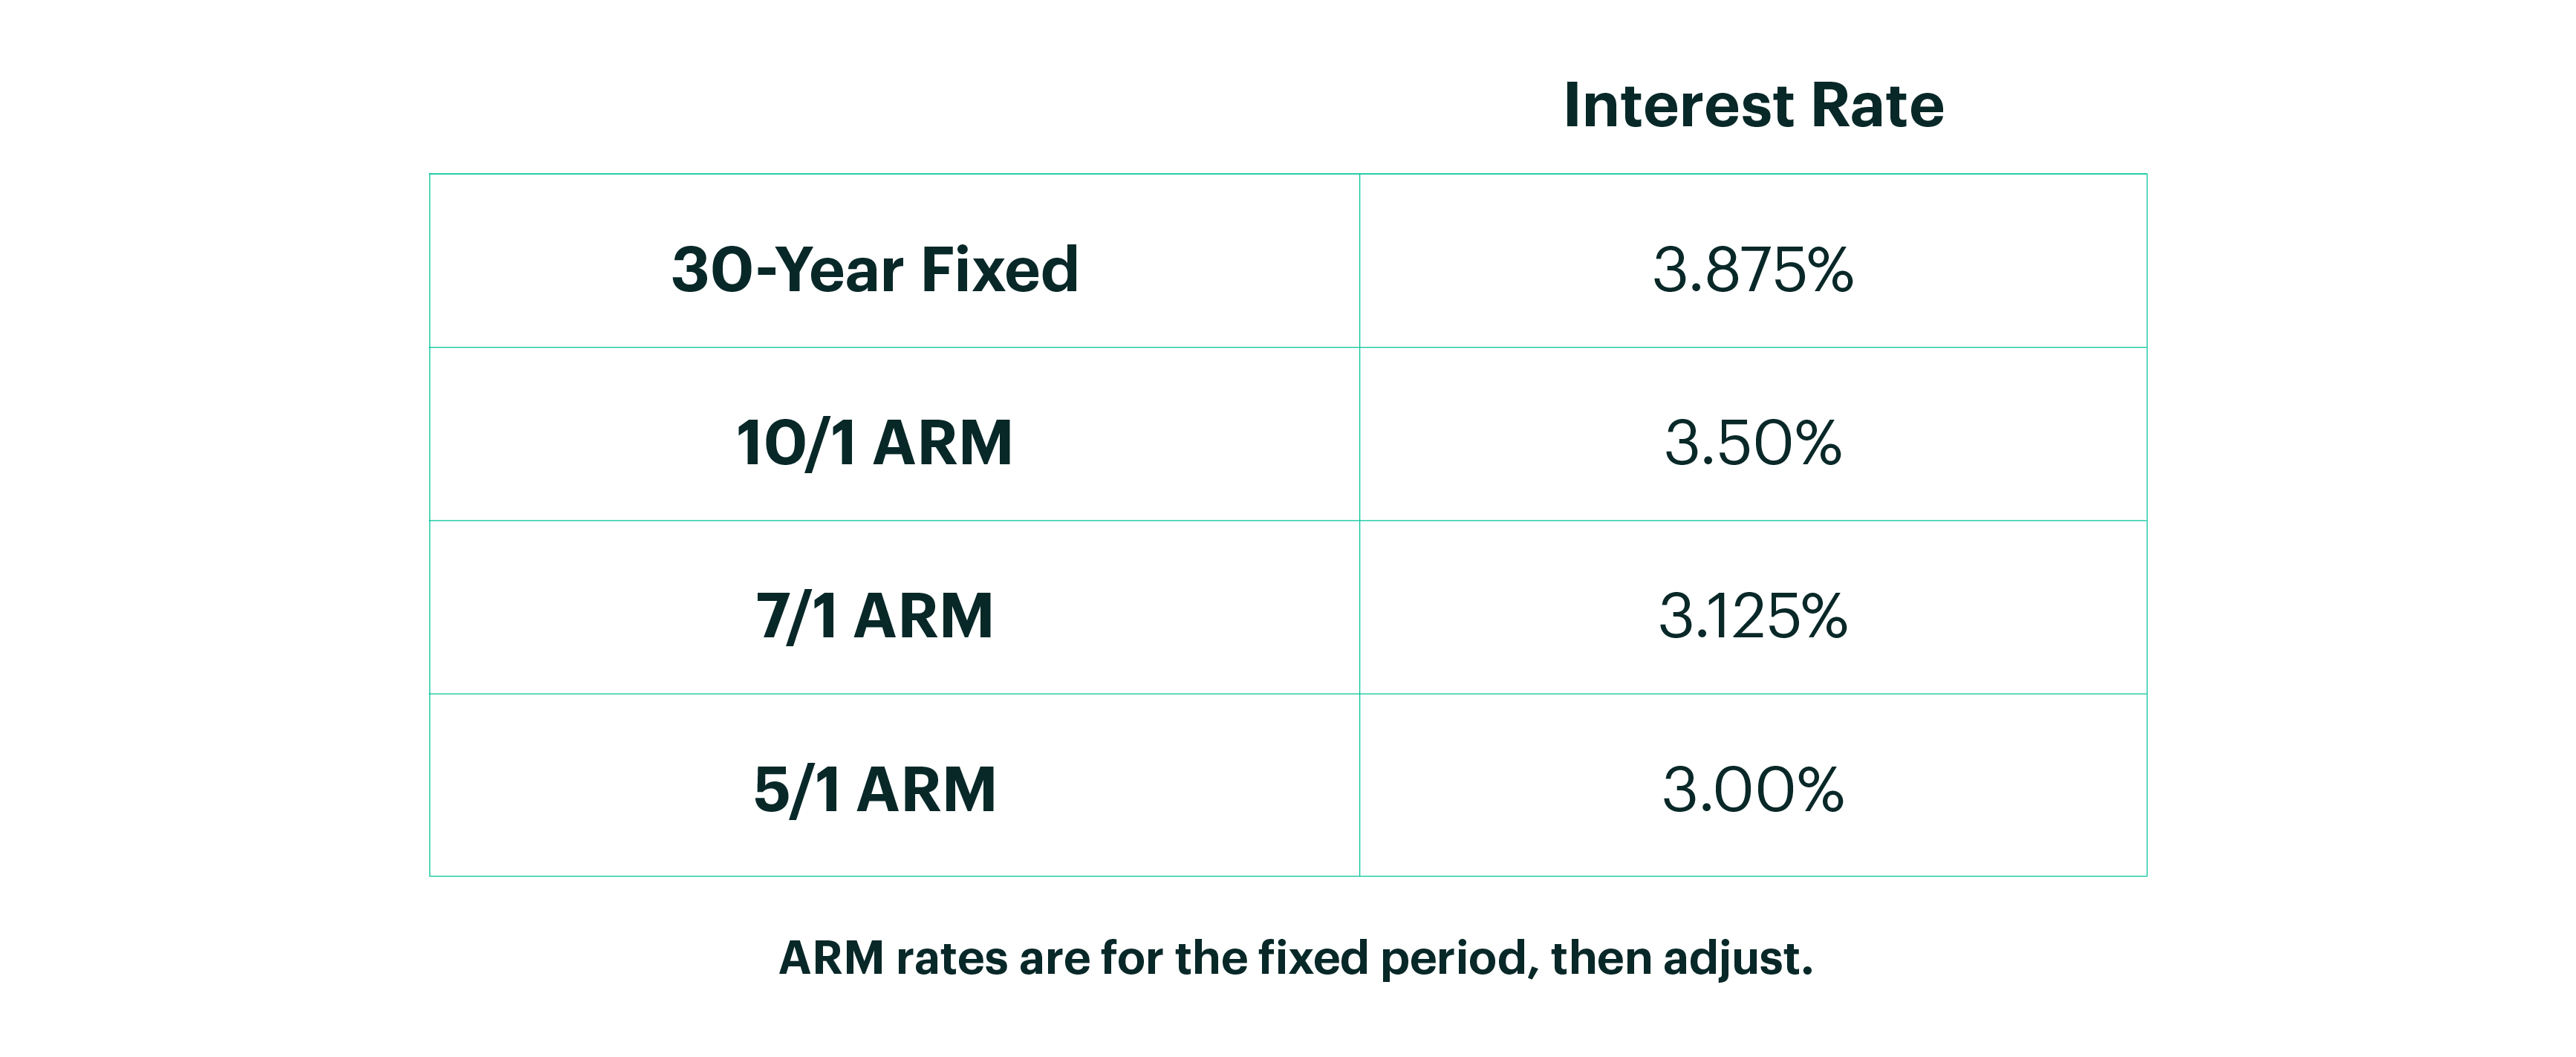  Table of 30 Year Fixed and ARM Rates and Corresponding Interest Rates